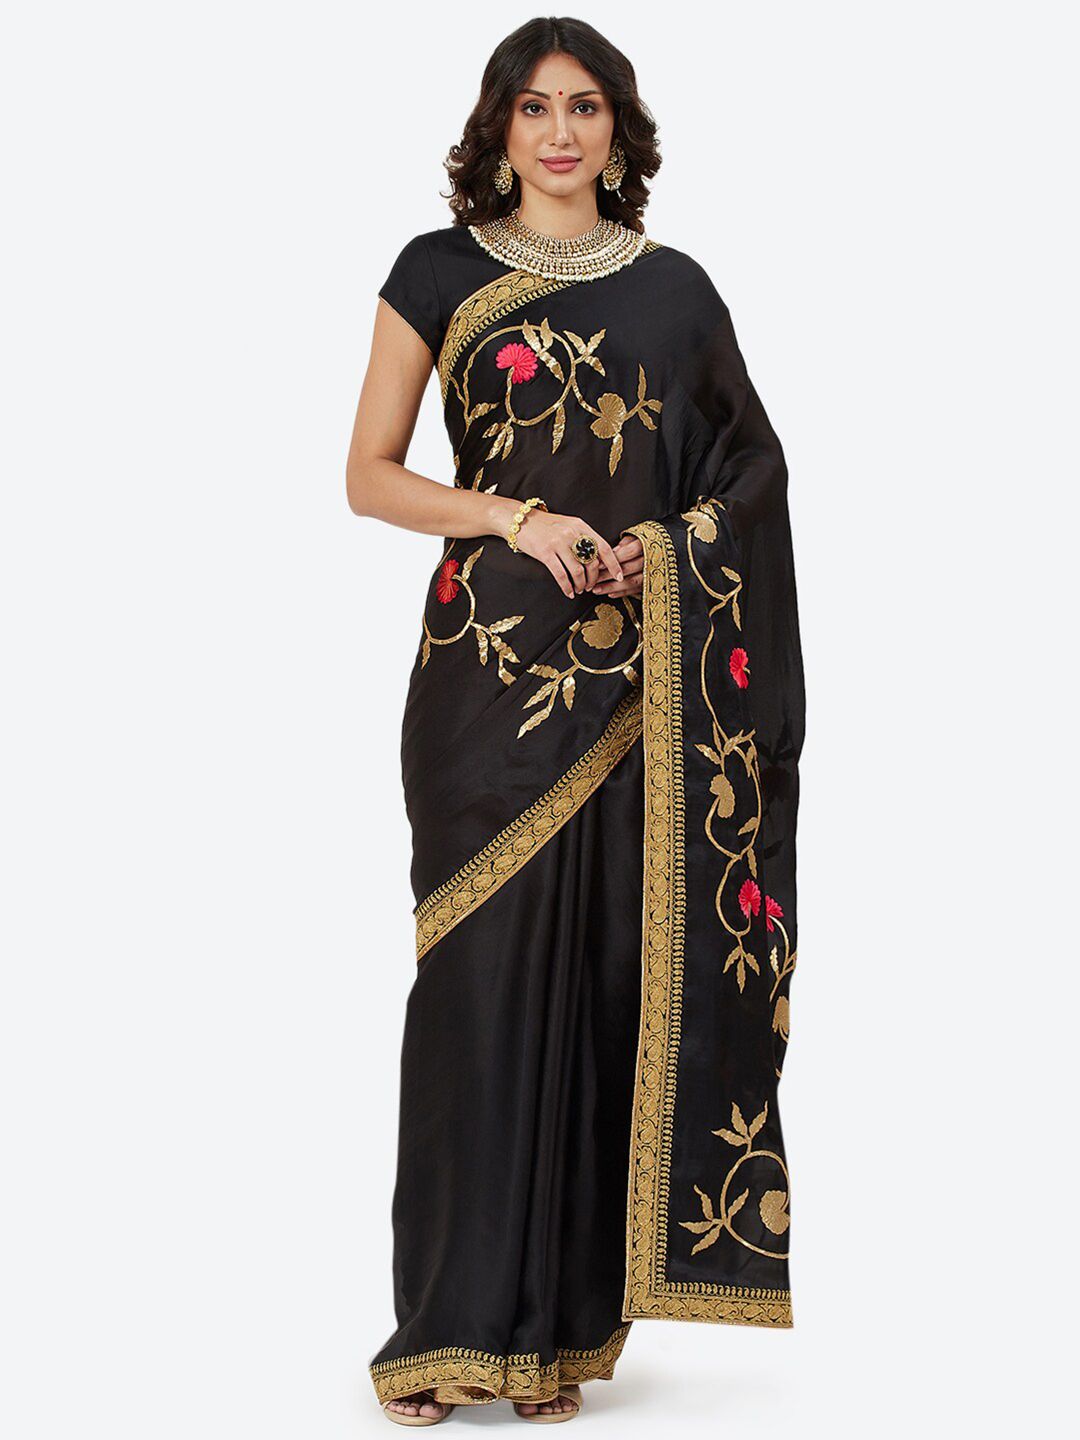 Biba by Rohit Bal Black & Gold-Toned Embellished Embroidered Silk Blend Chanderi Saree Price in India